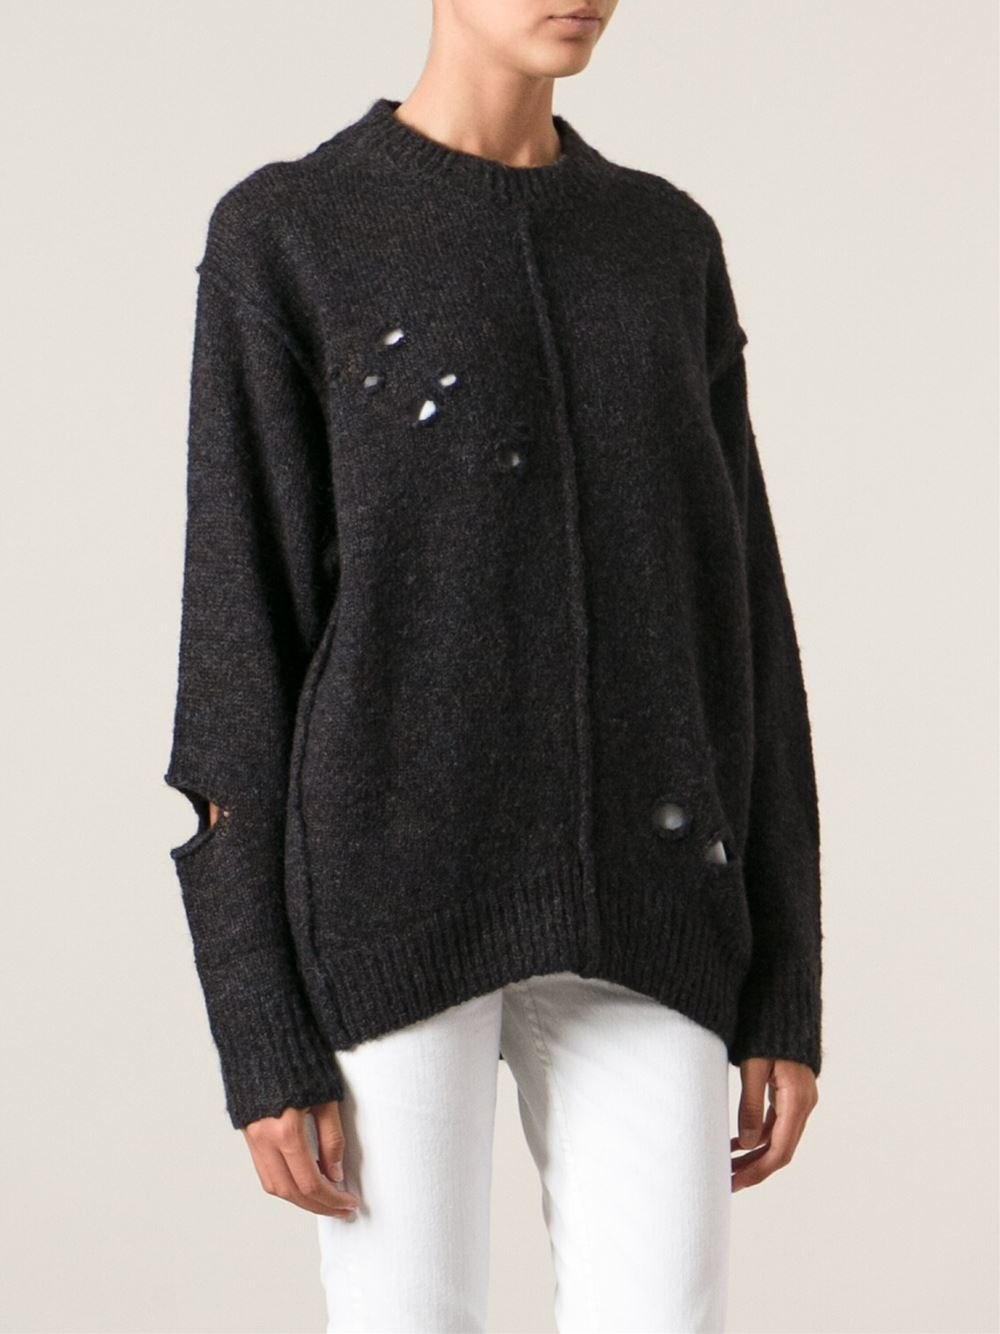 Étoile Isabel Marant Distressed Knit Sweater in Gray | Lyst